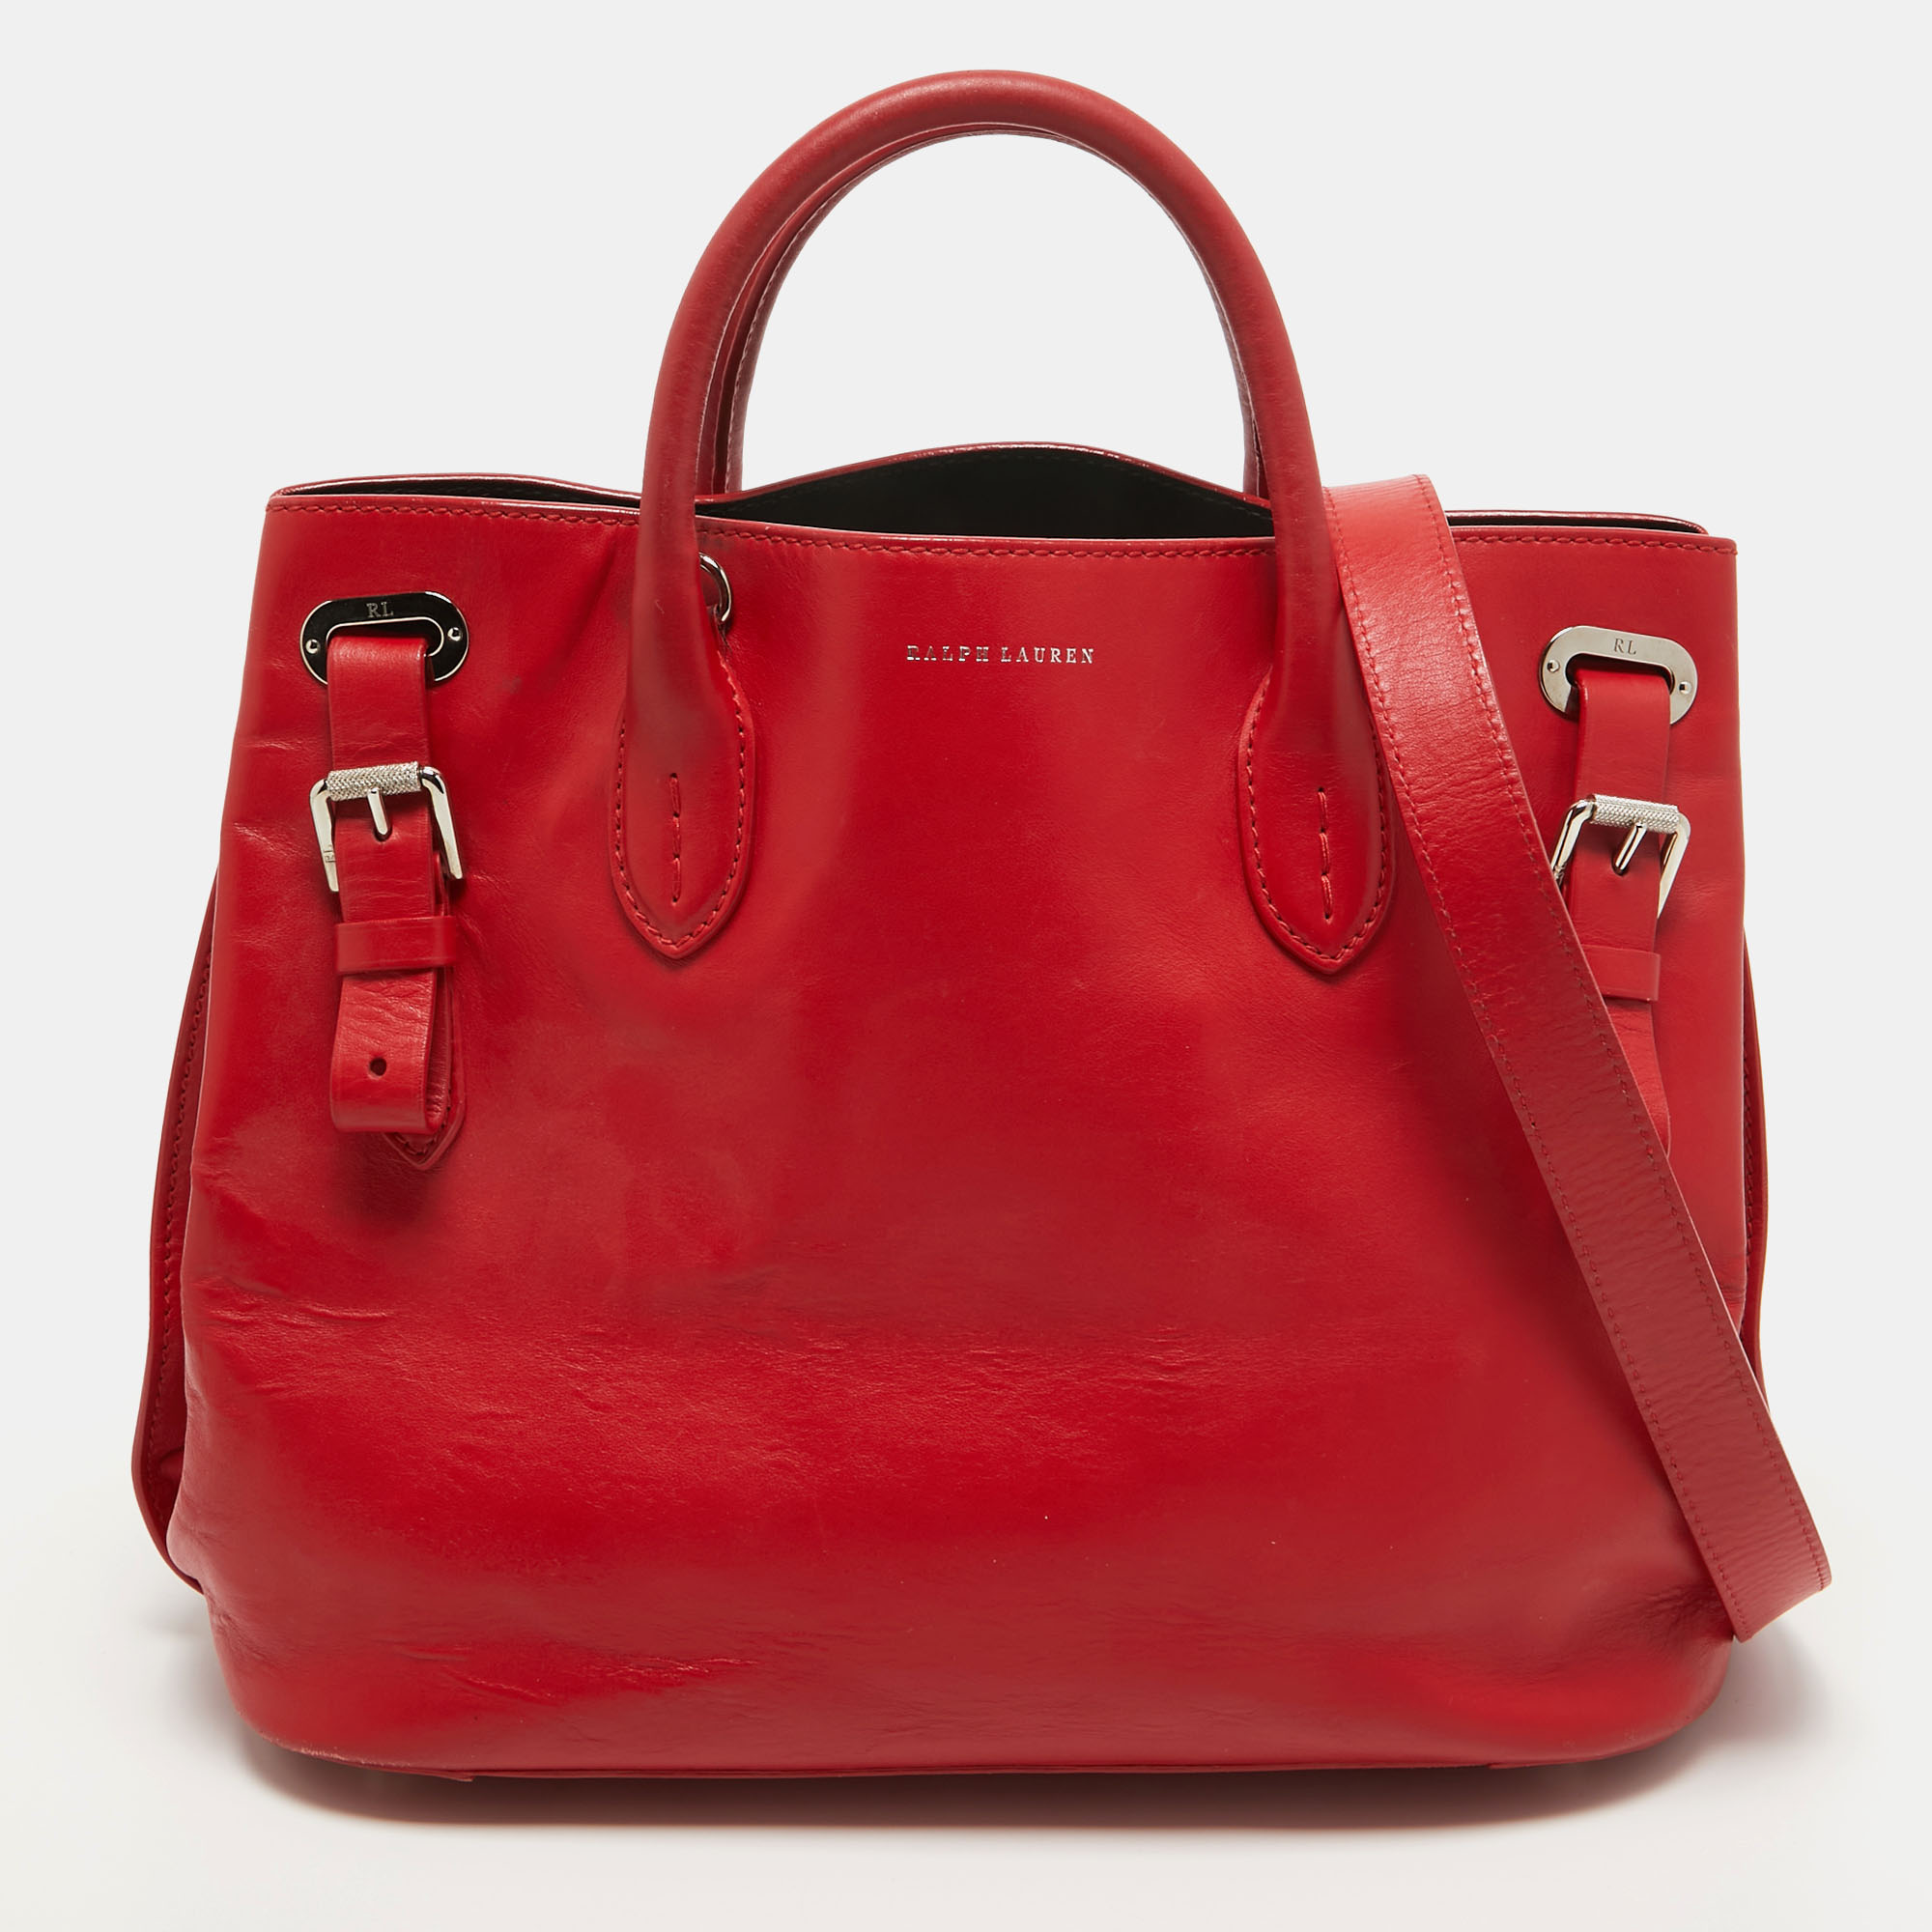 Ralph lauren red leather tote